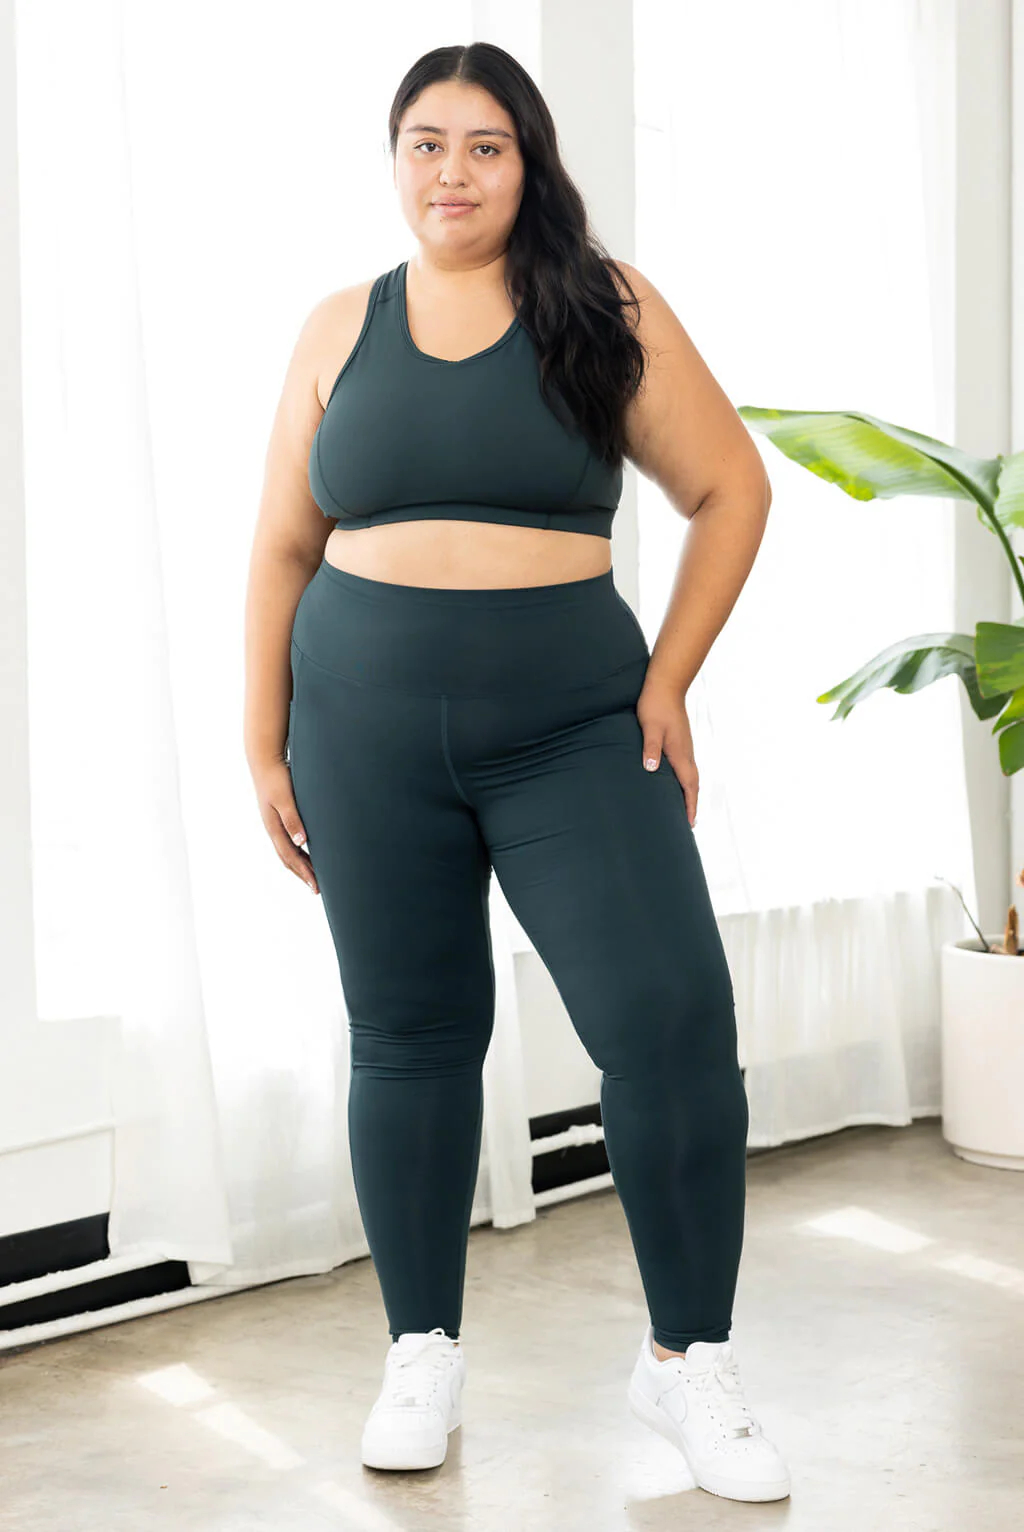 Plus size leggings for women, selecting the perfect pair of leggings is essential for women of all sizes, and for plus-size women